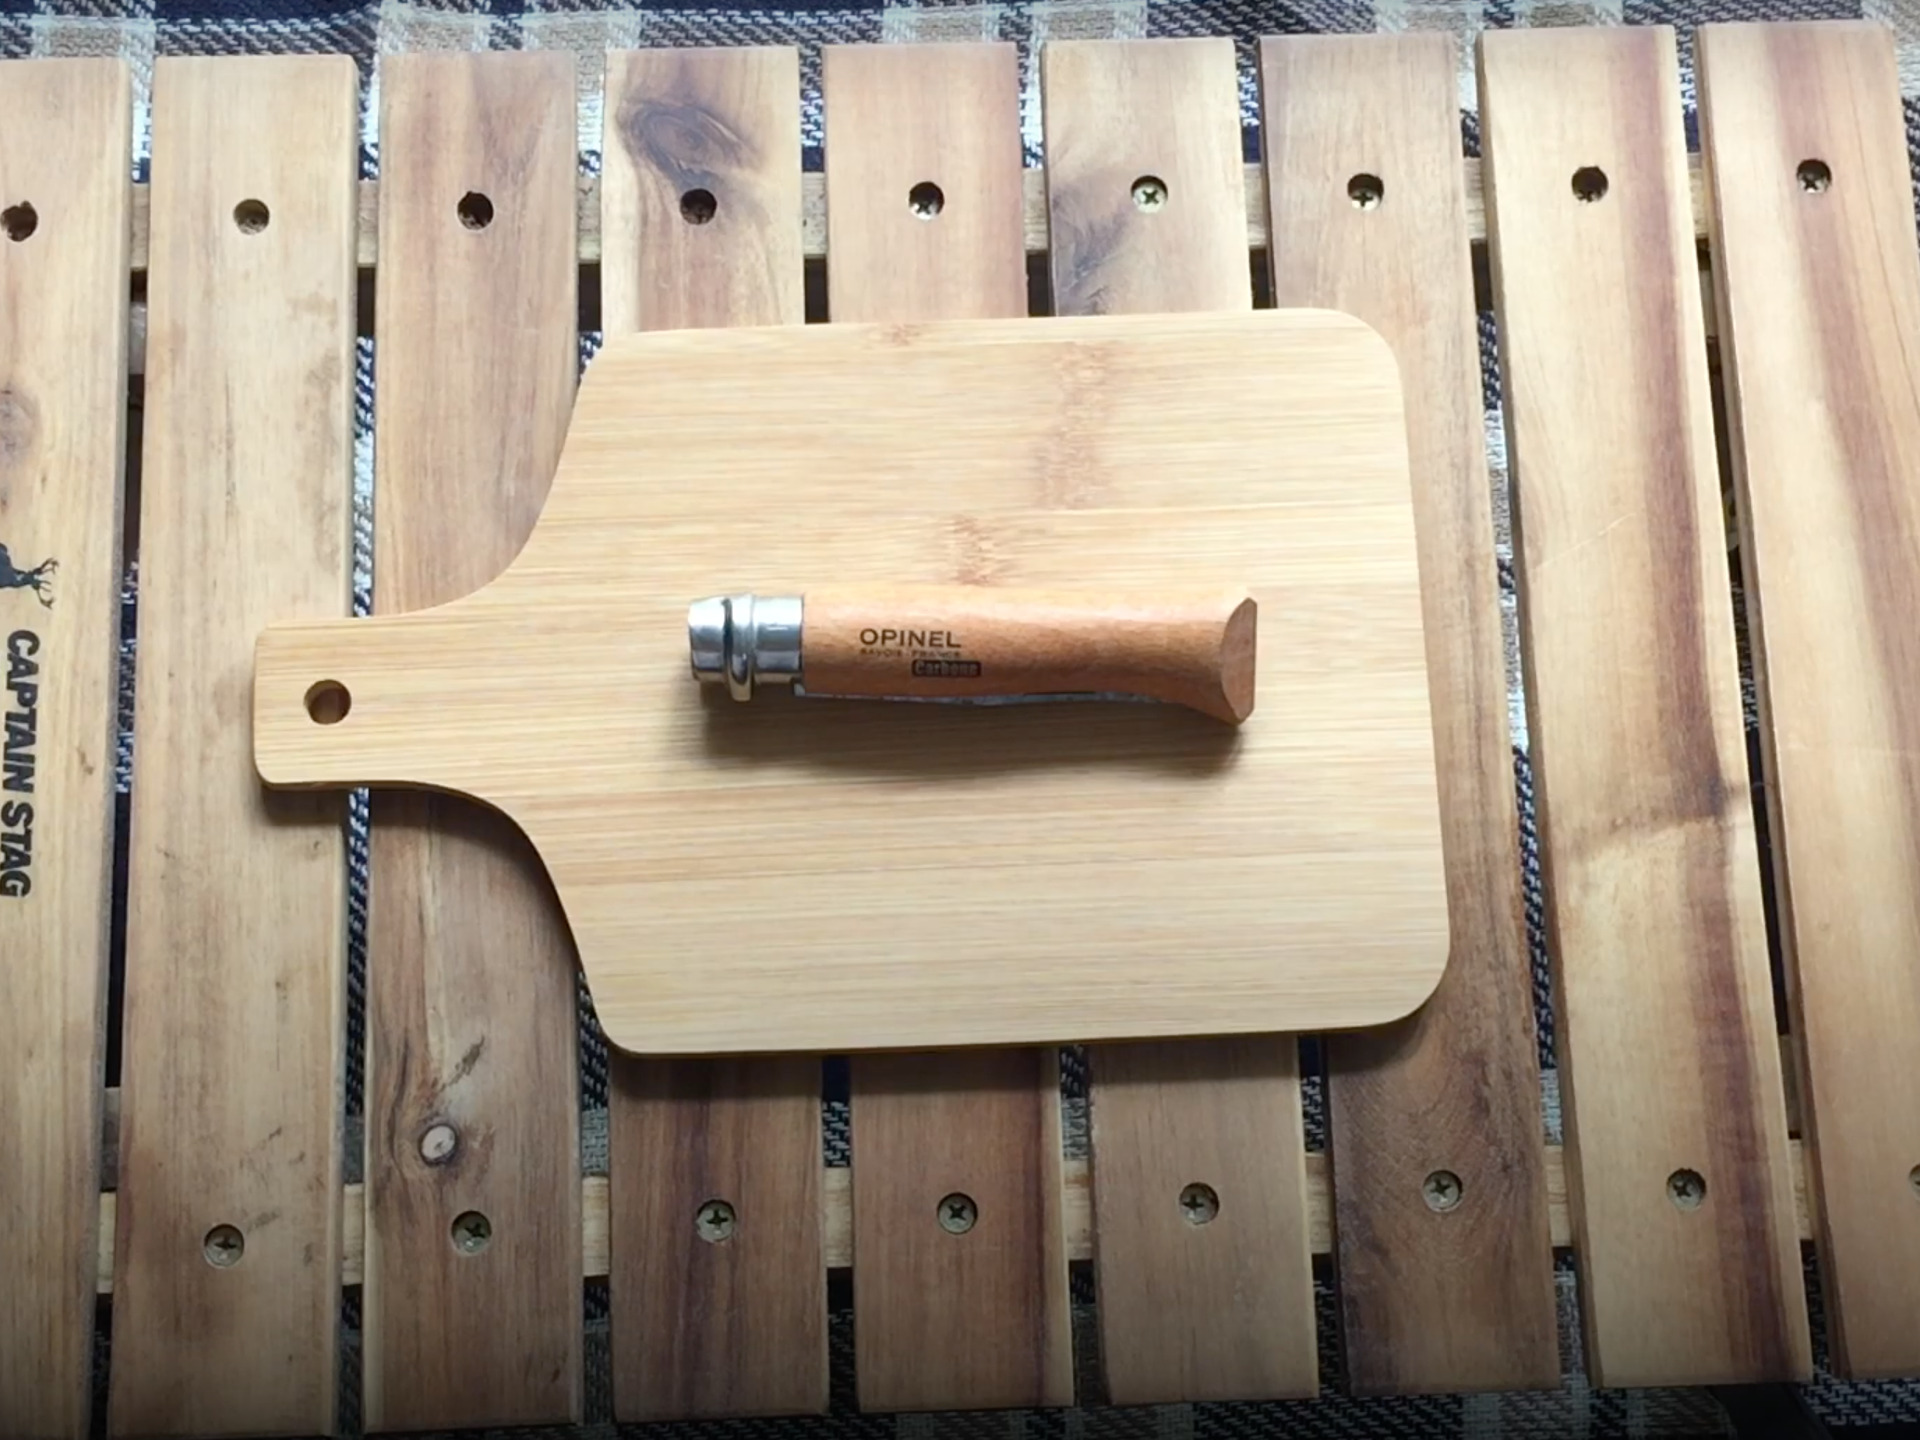 【outdoors】OPINEL x BE-PALカッティングボード